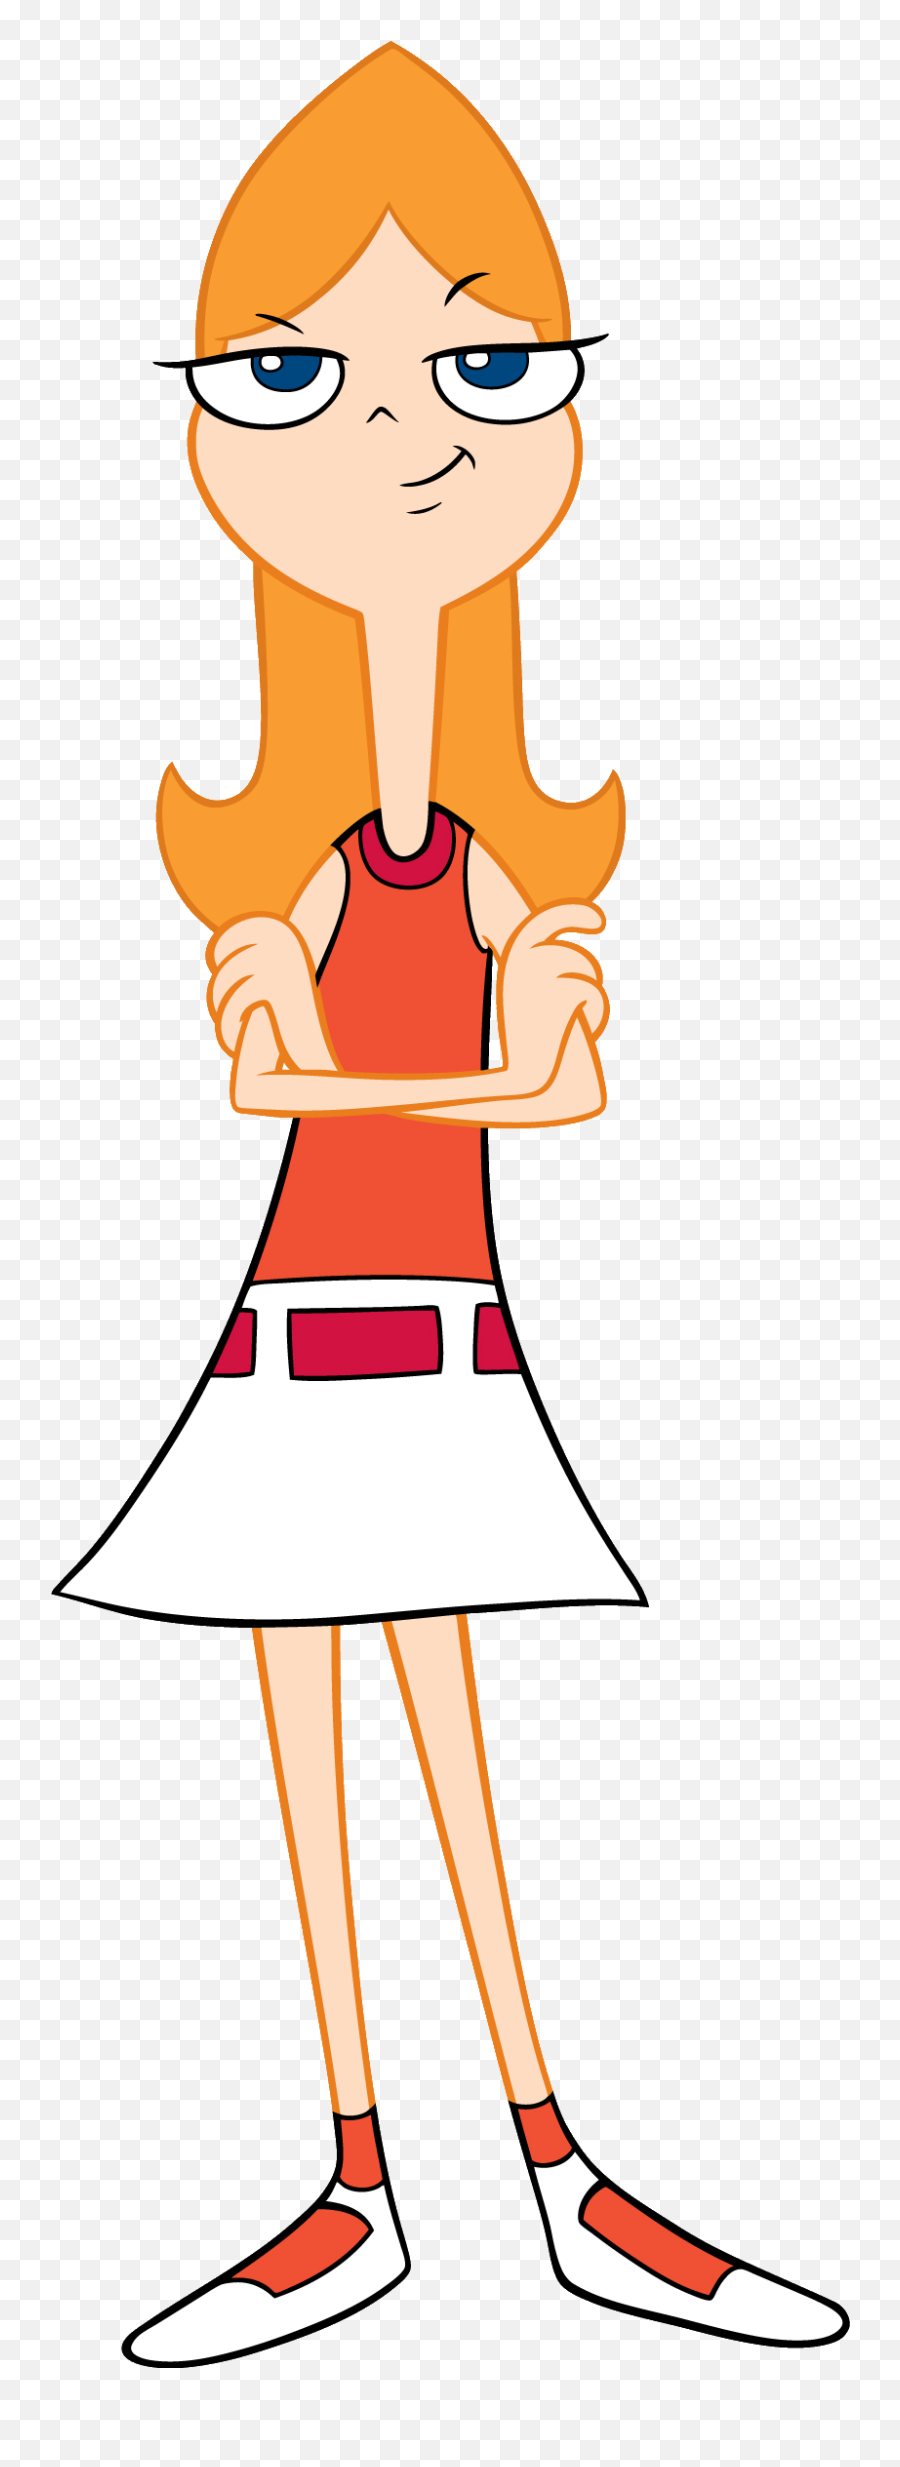 Phineas And Ferb Cartoon - Candace Phineas And Ferb Emoji,Phineas And Ferb Logo